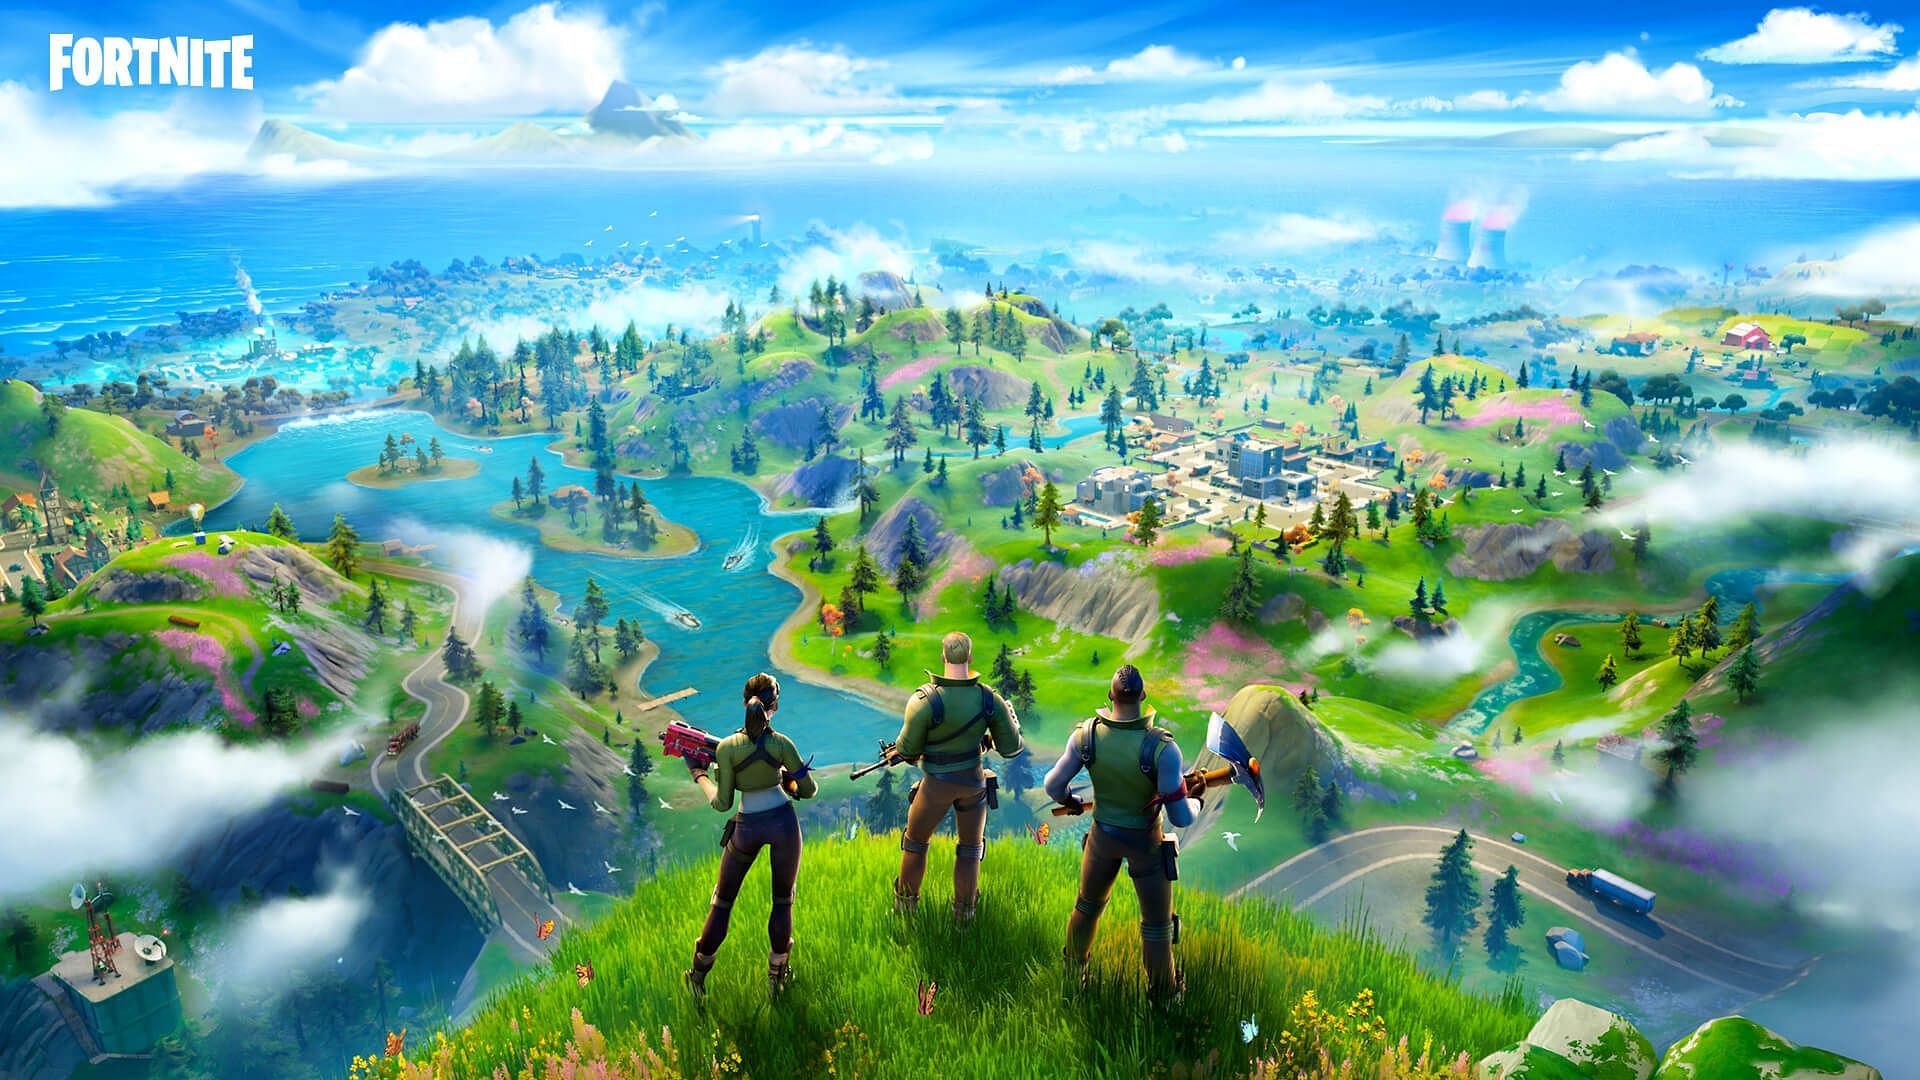 Gamers can get abundant XP by completing Fortnite survey (Image via Epic Games)